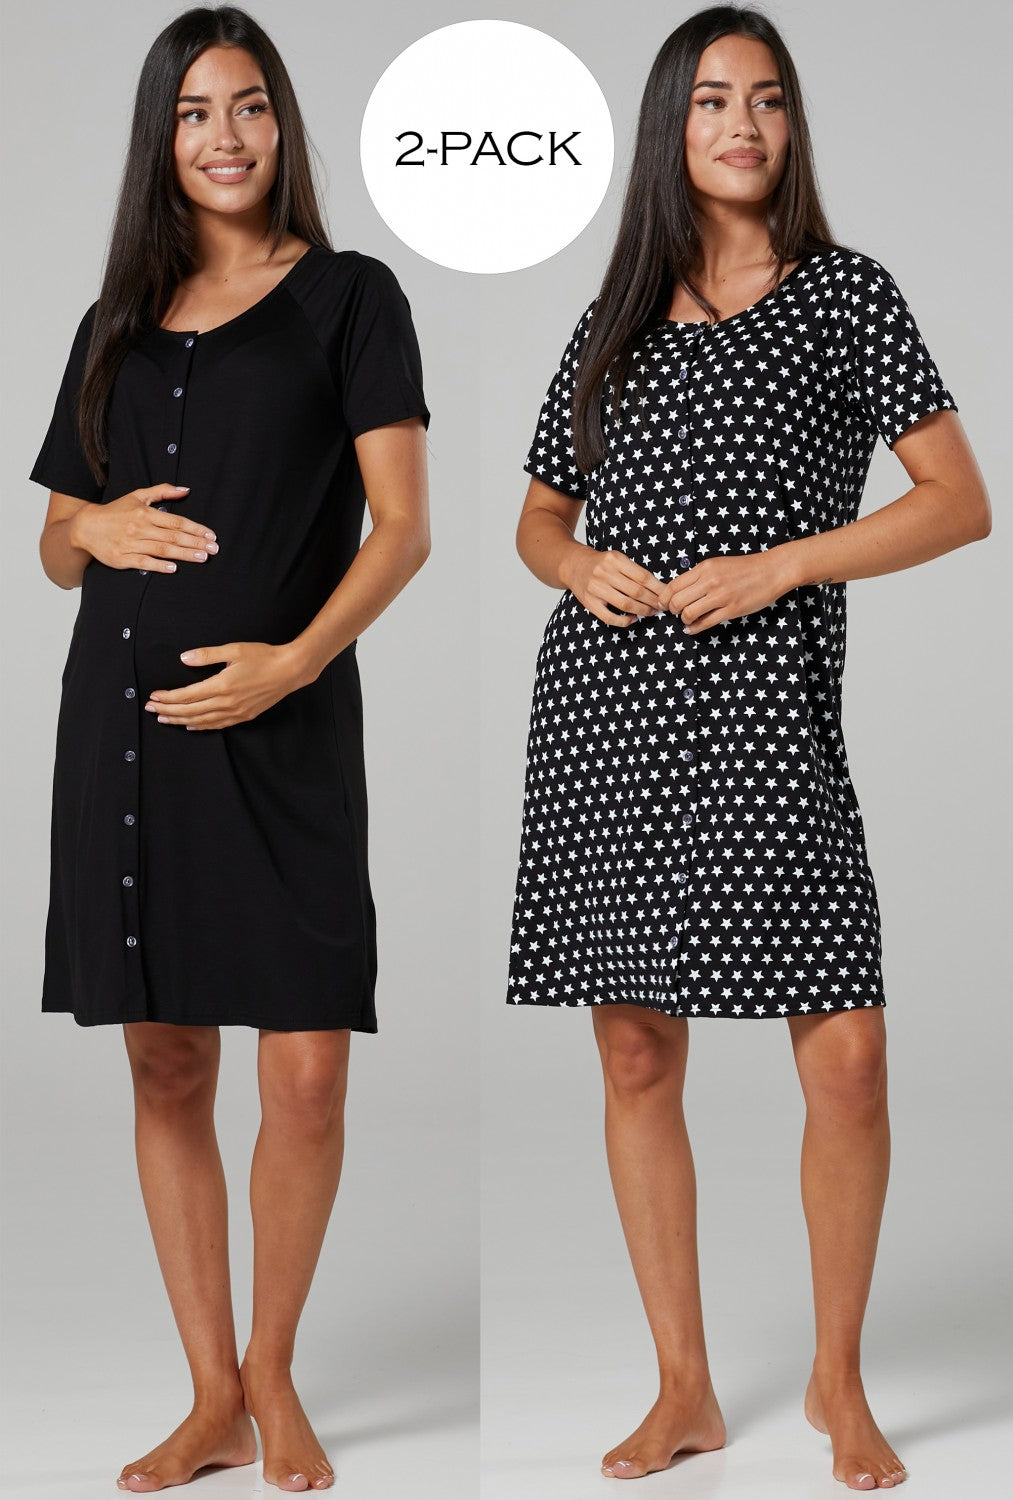 Plus Size Labor And Delivery Gown | premindustry.com